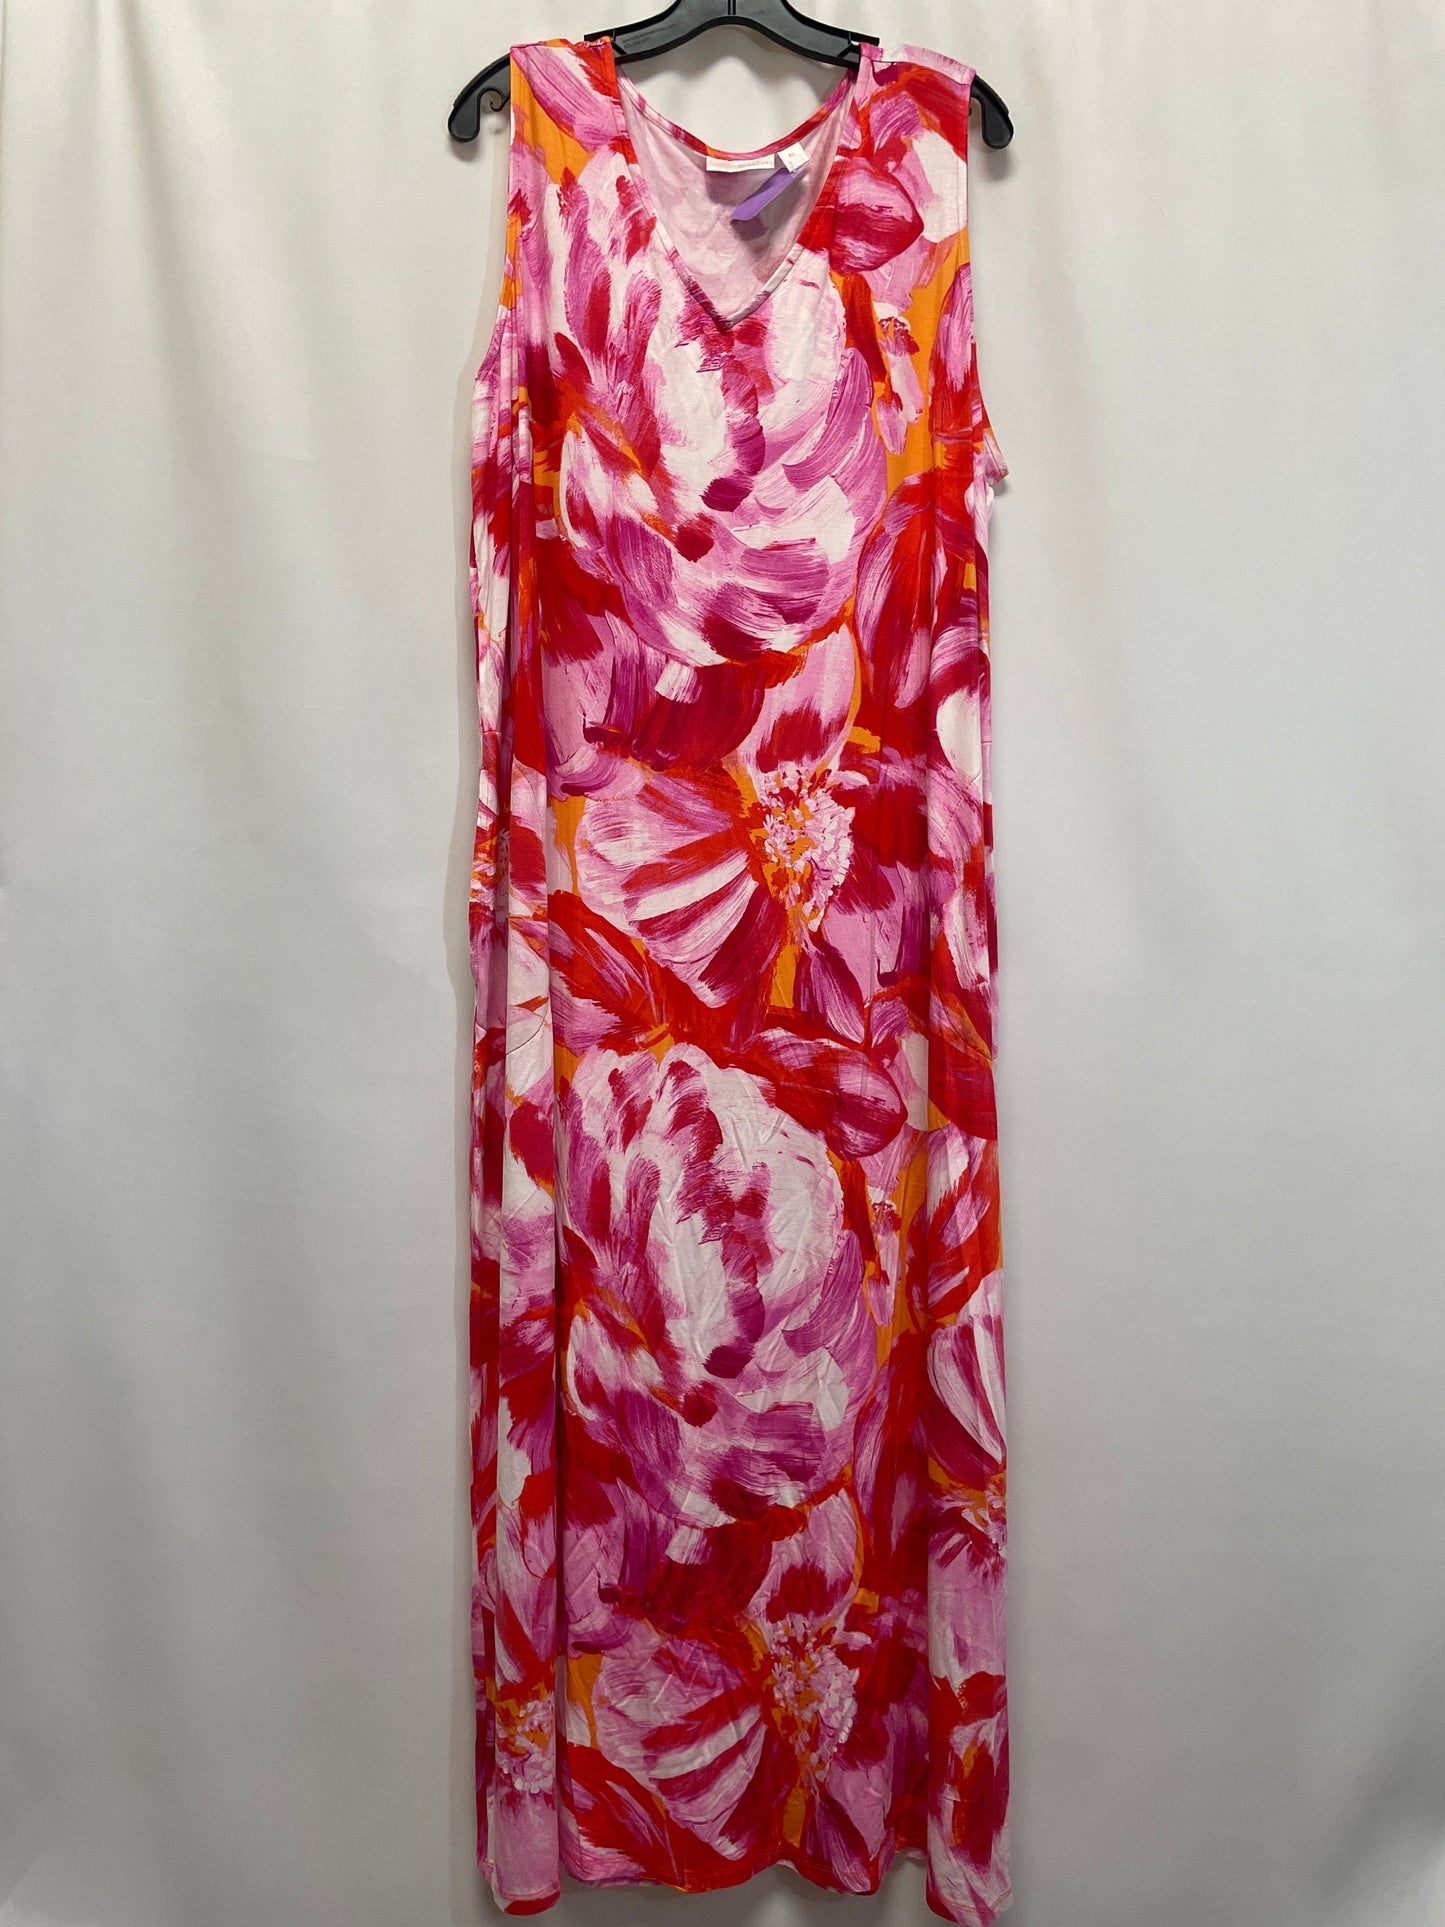 Pink Dress Casual Maxi Clothes Mentor, Size 2x